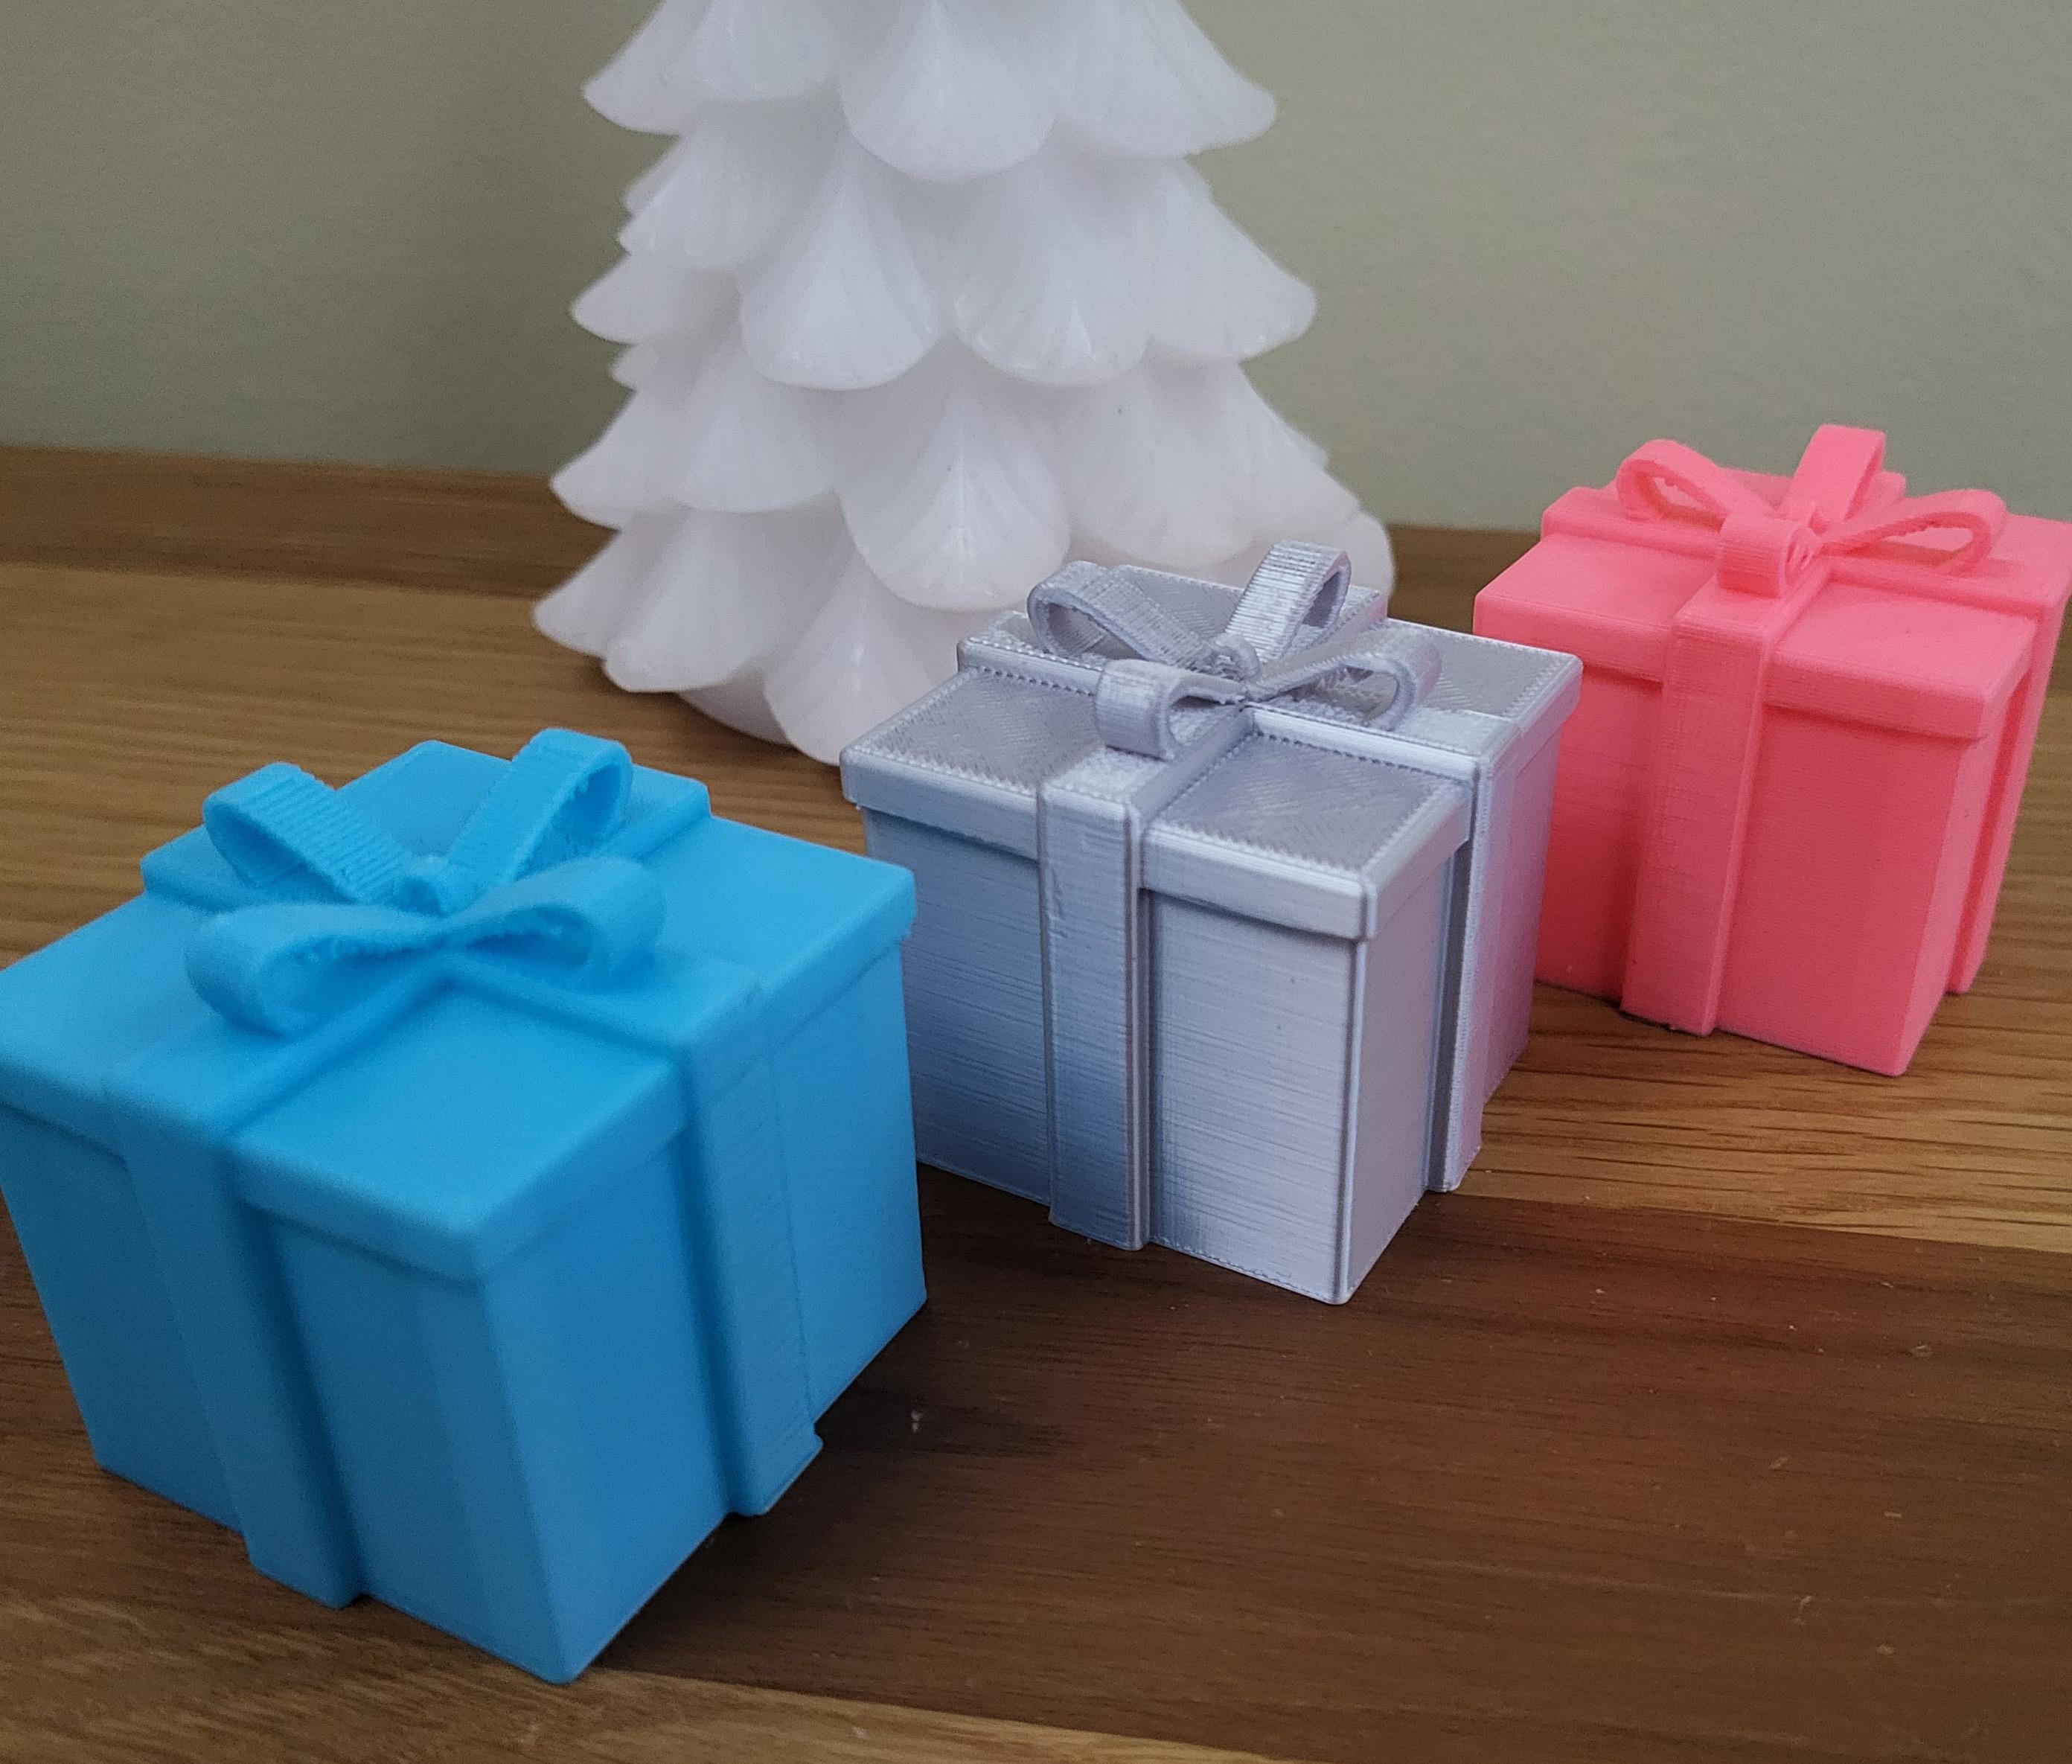 Christmas Tree Present Decoration (no support, easy print) 3d model